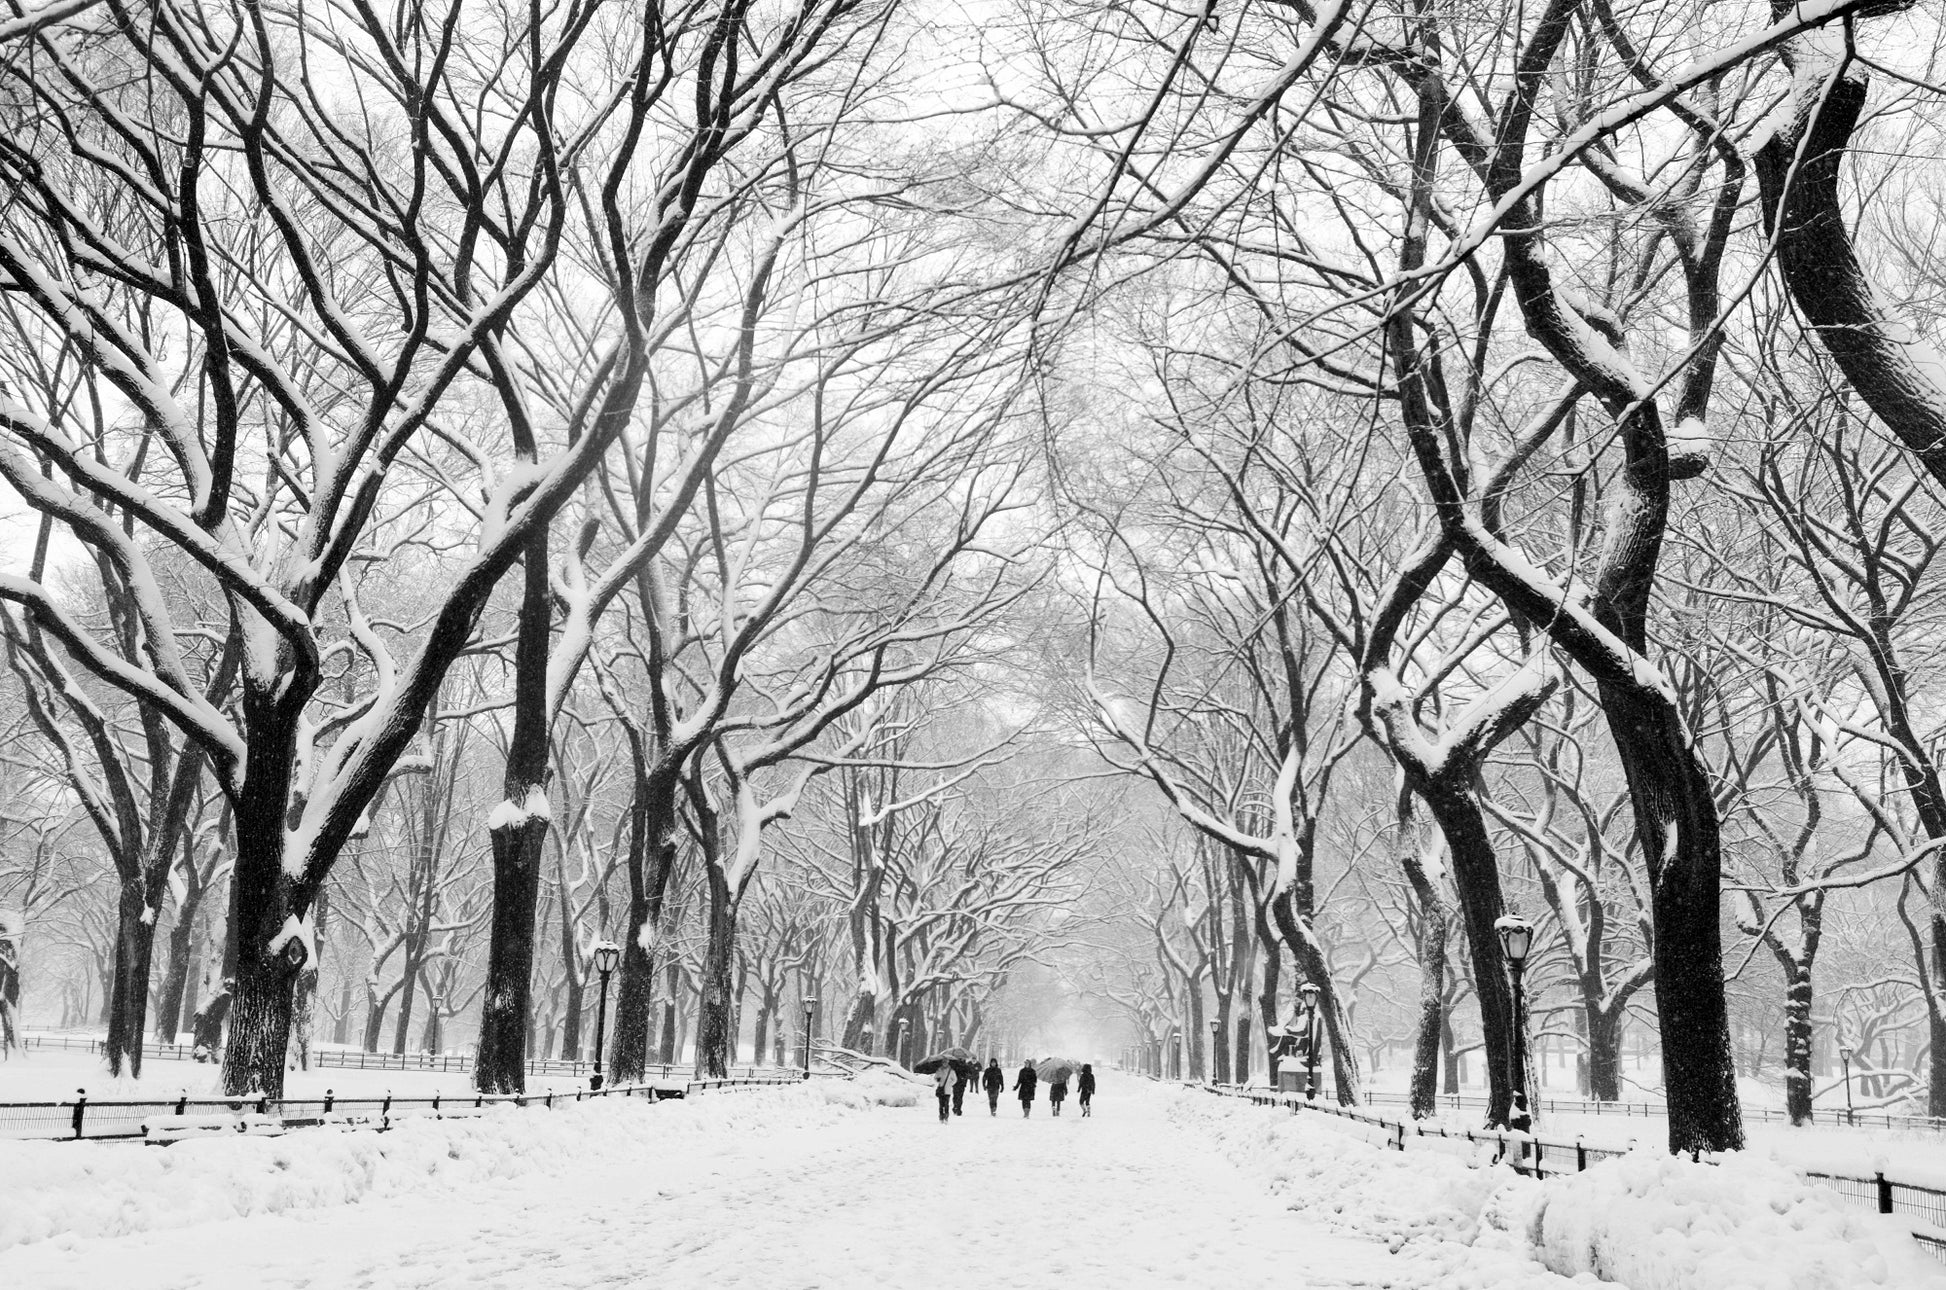 Alessandra Mattanza | INFINITY OF TREES, Central Park, New York. Visitors brave the winter weather in Central Park. Available as a photographic print on acrylic glass.